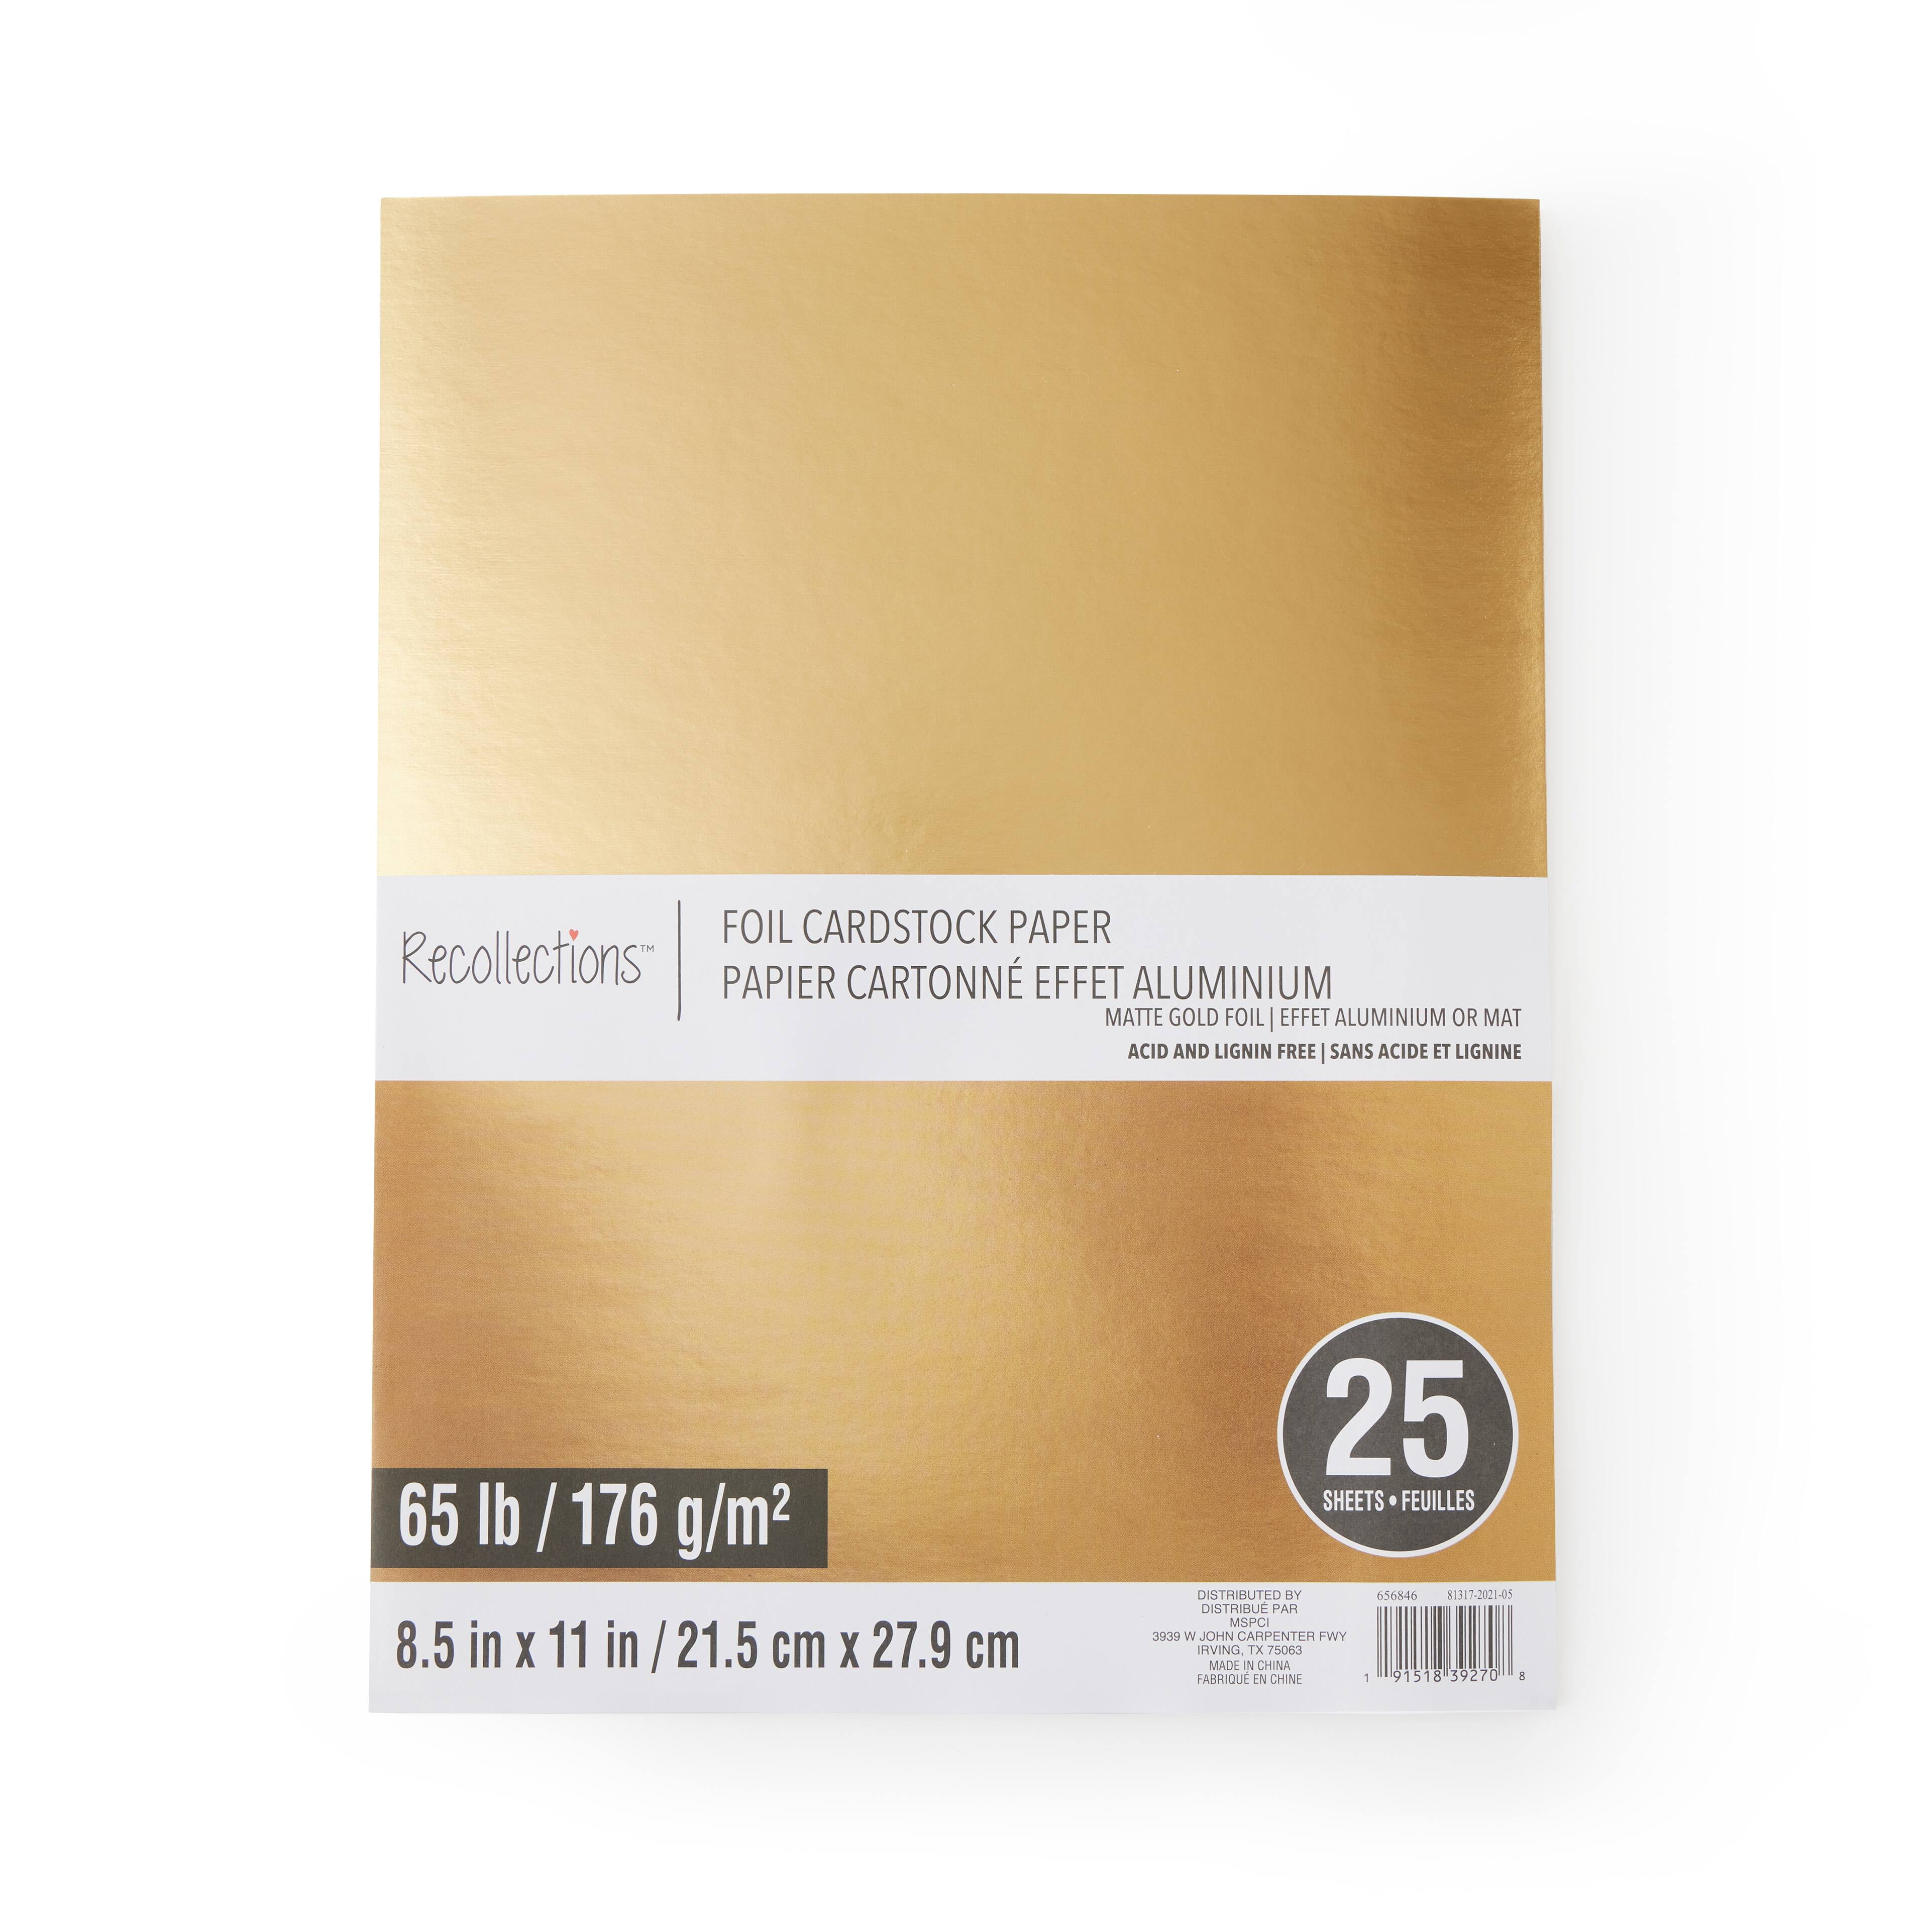 8.5 x 11 Foil Cardstock Paper by Recollections™, 25 Sheets 